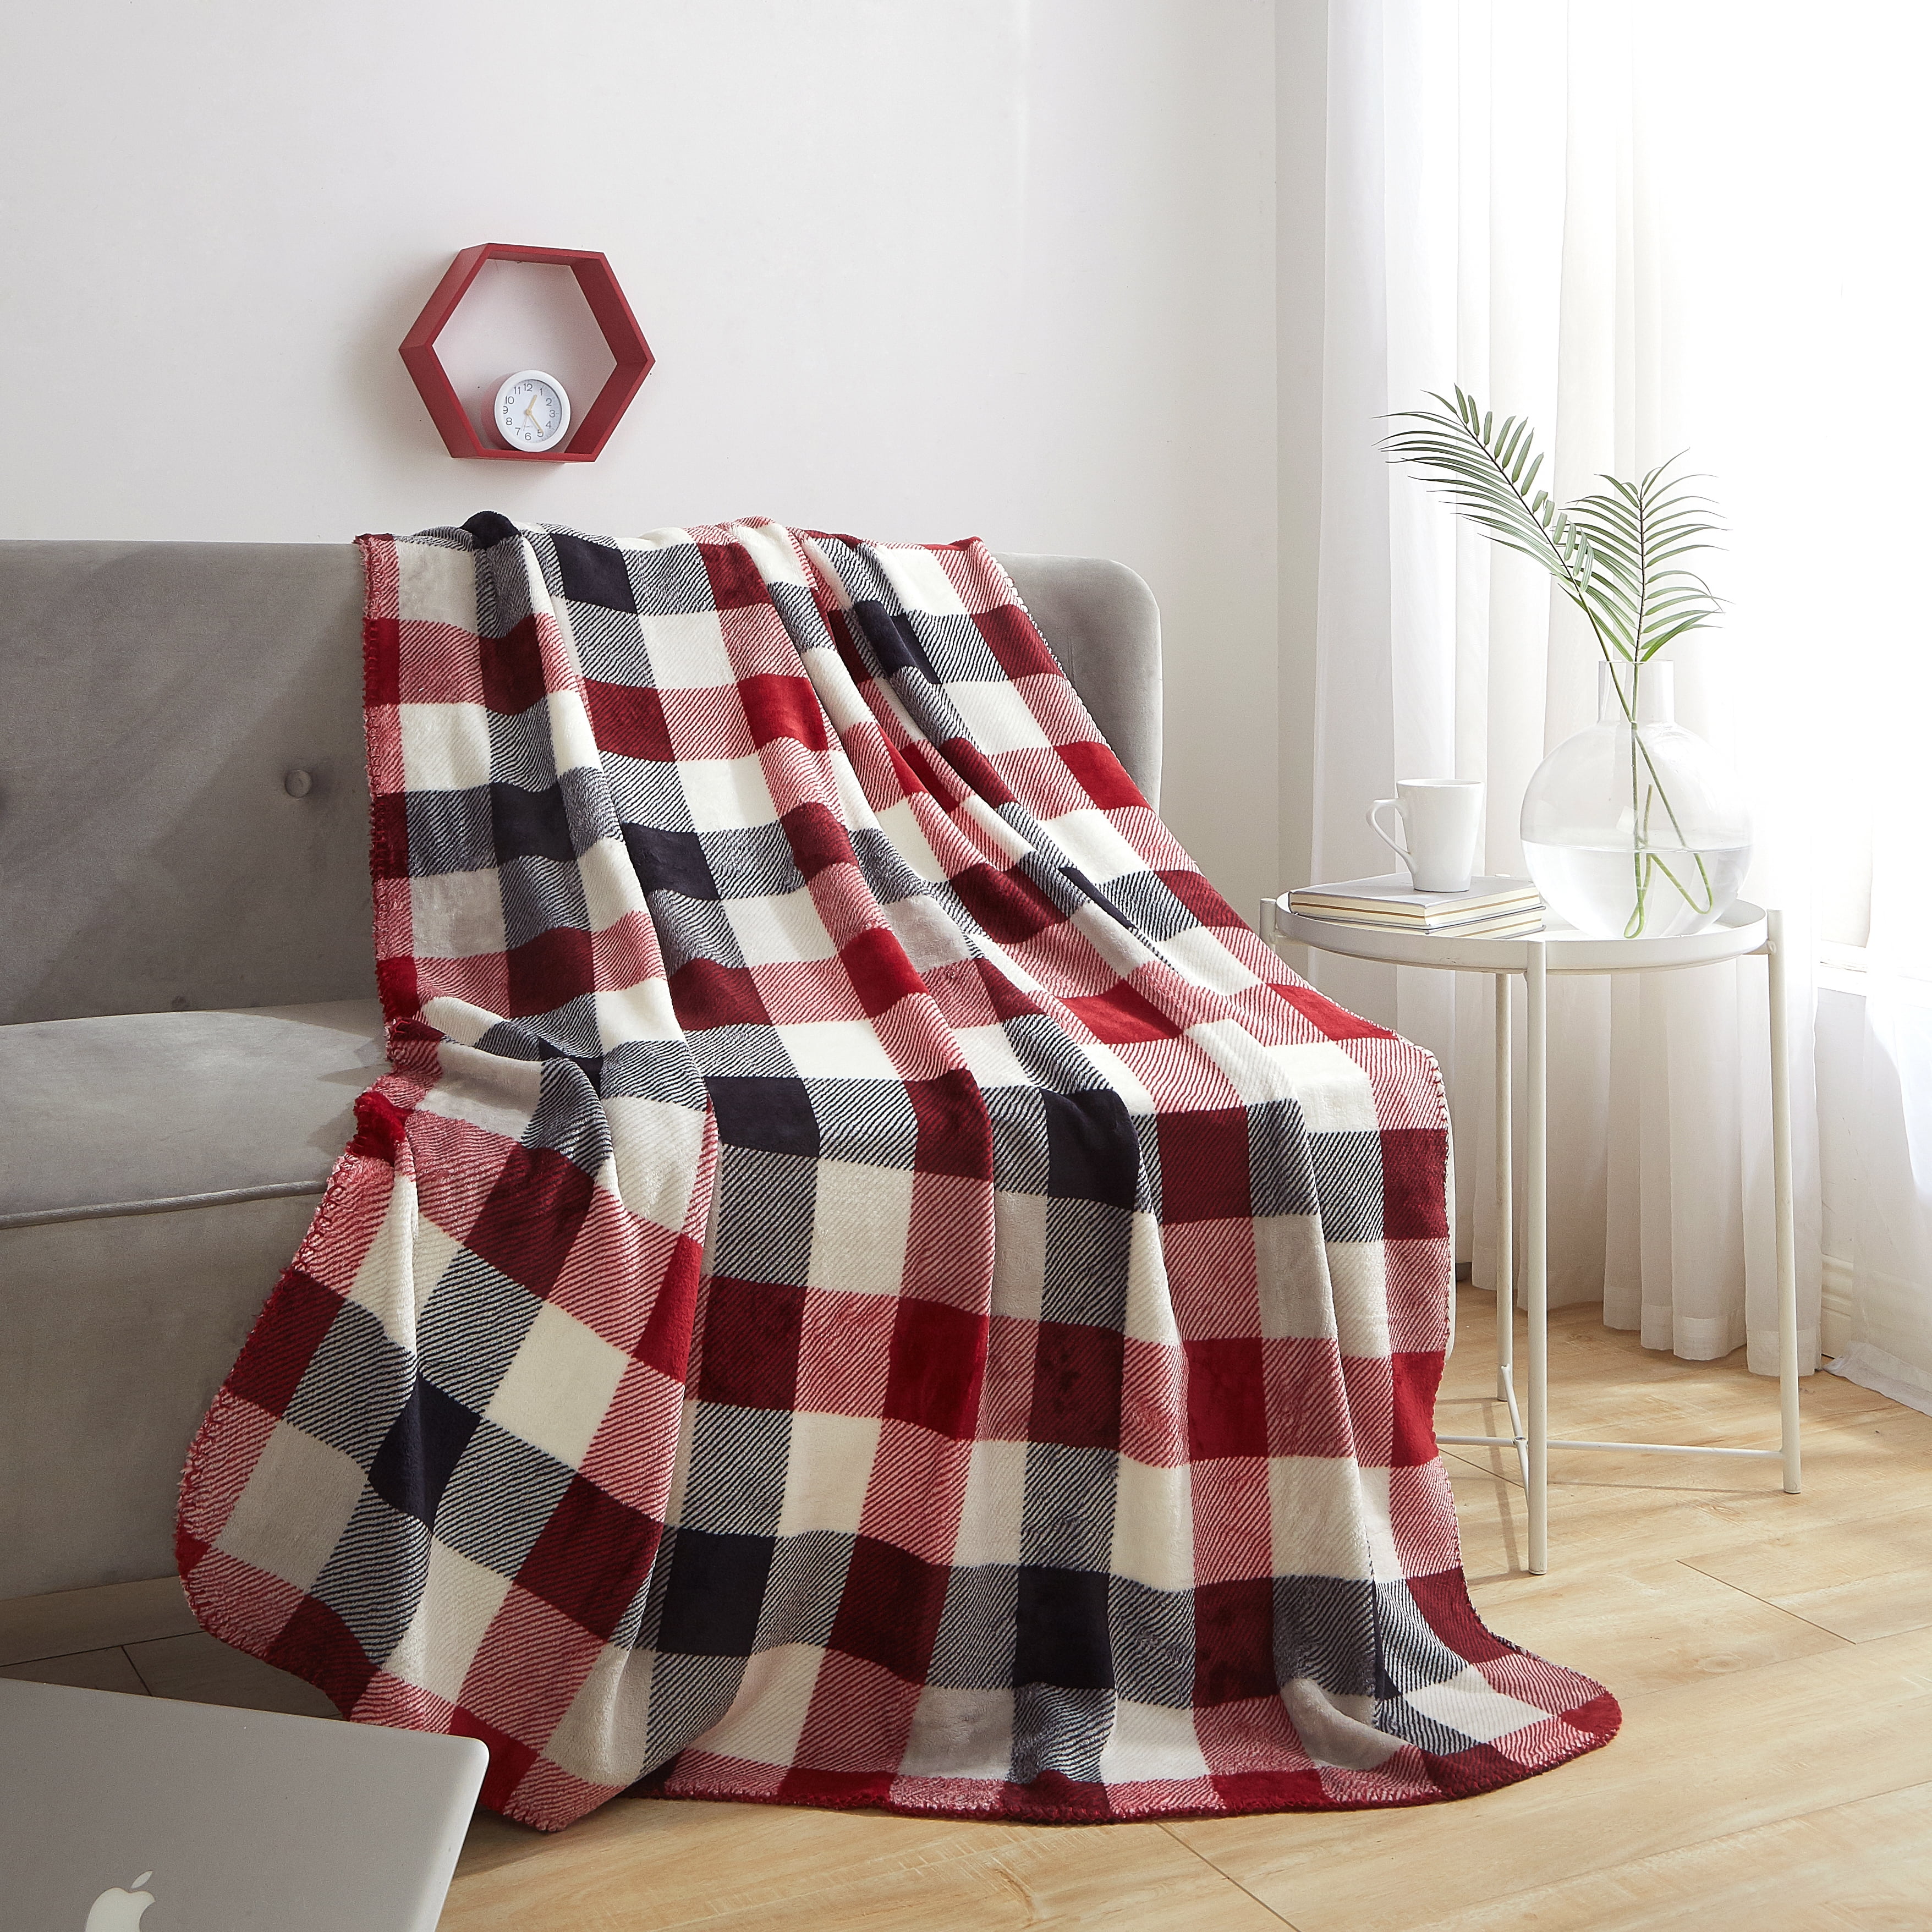 Holiday Time Plush Throw Racer Red 50 x 60 inches Blanket 